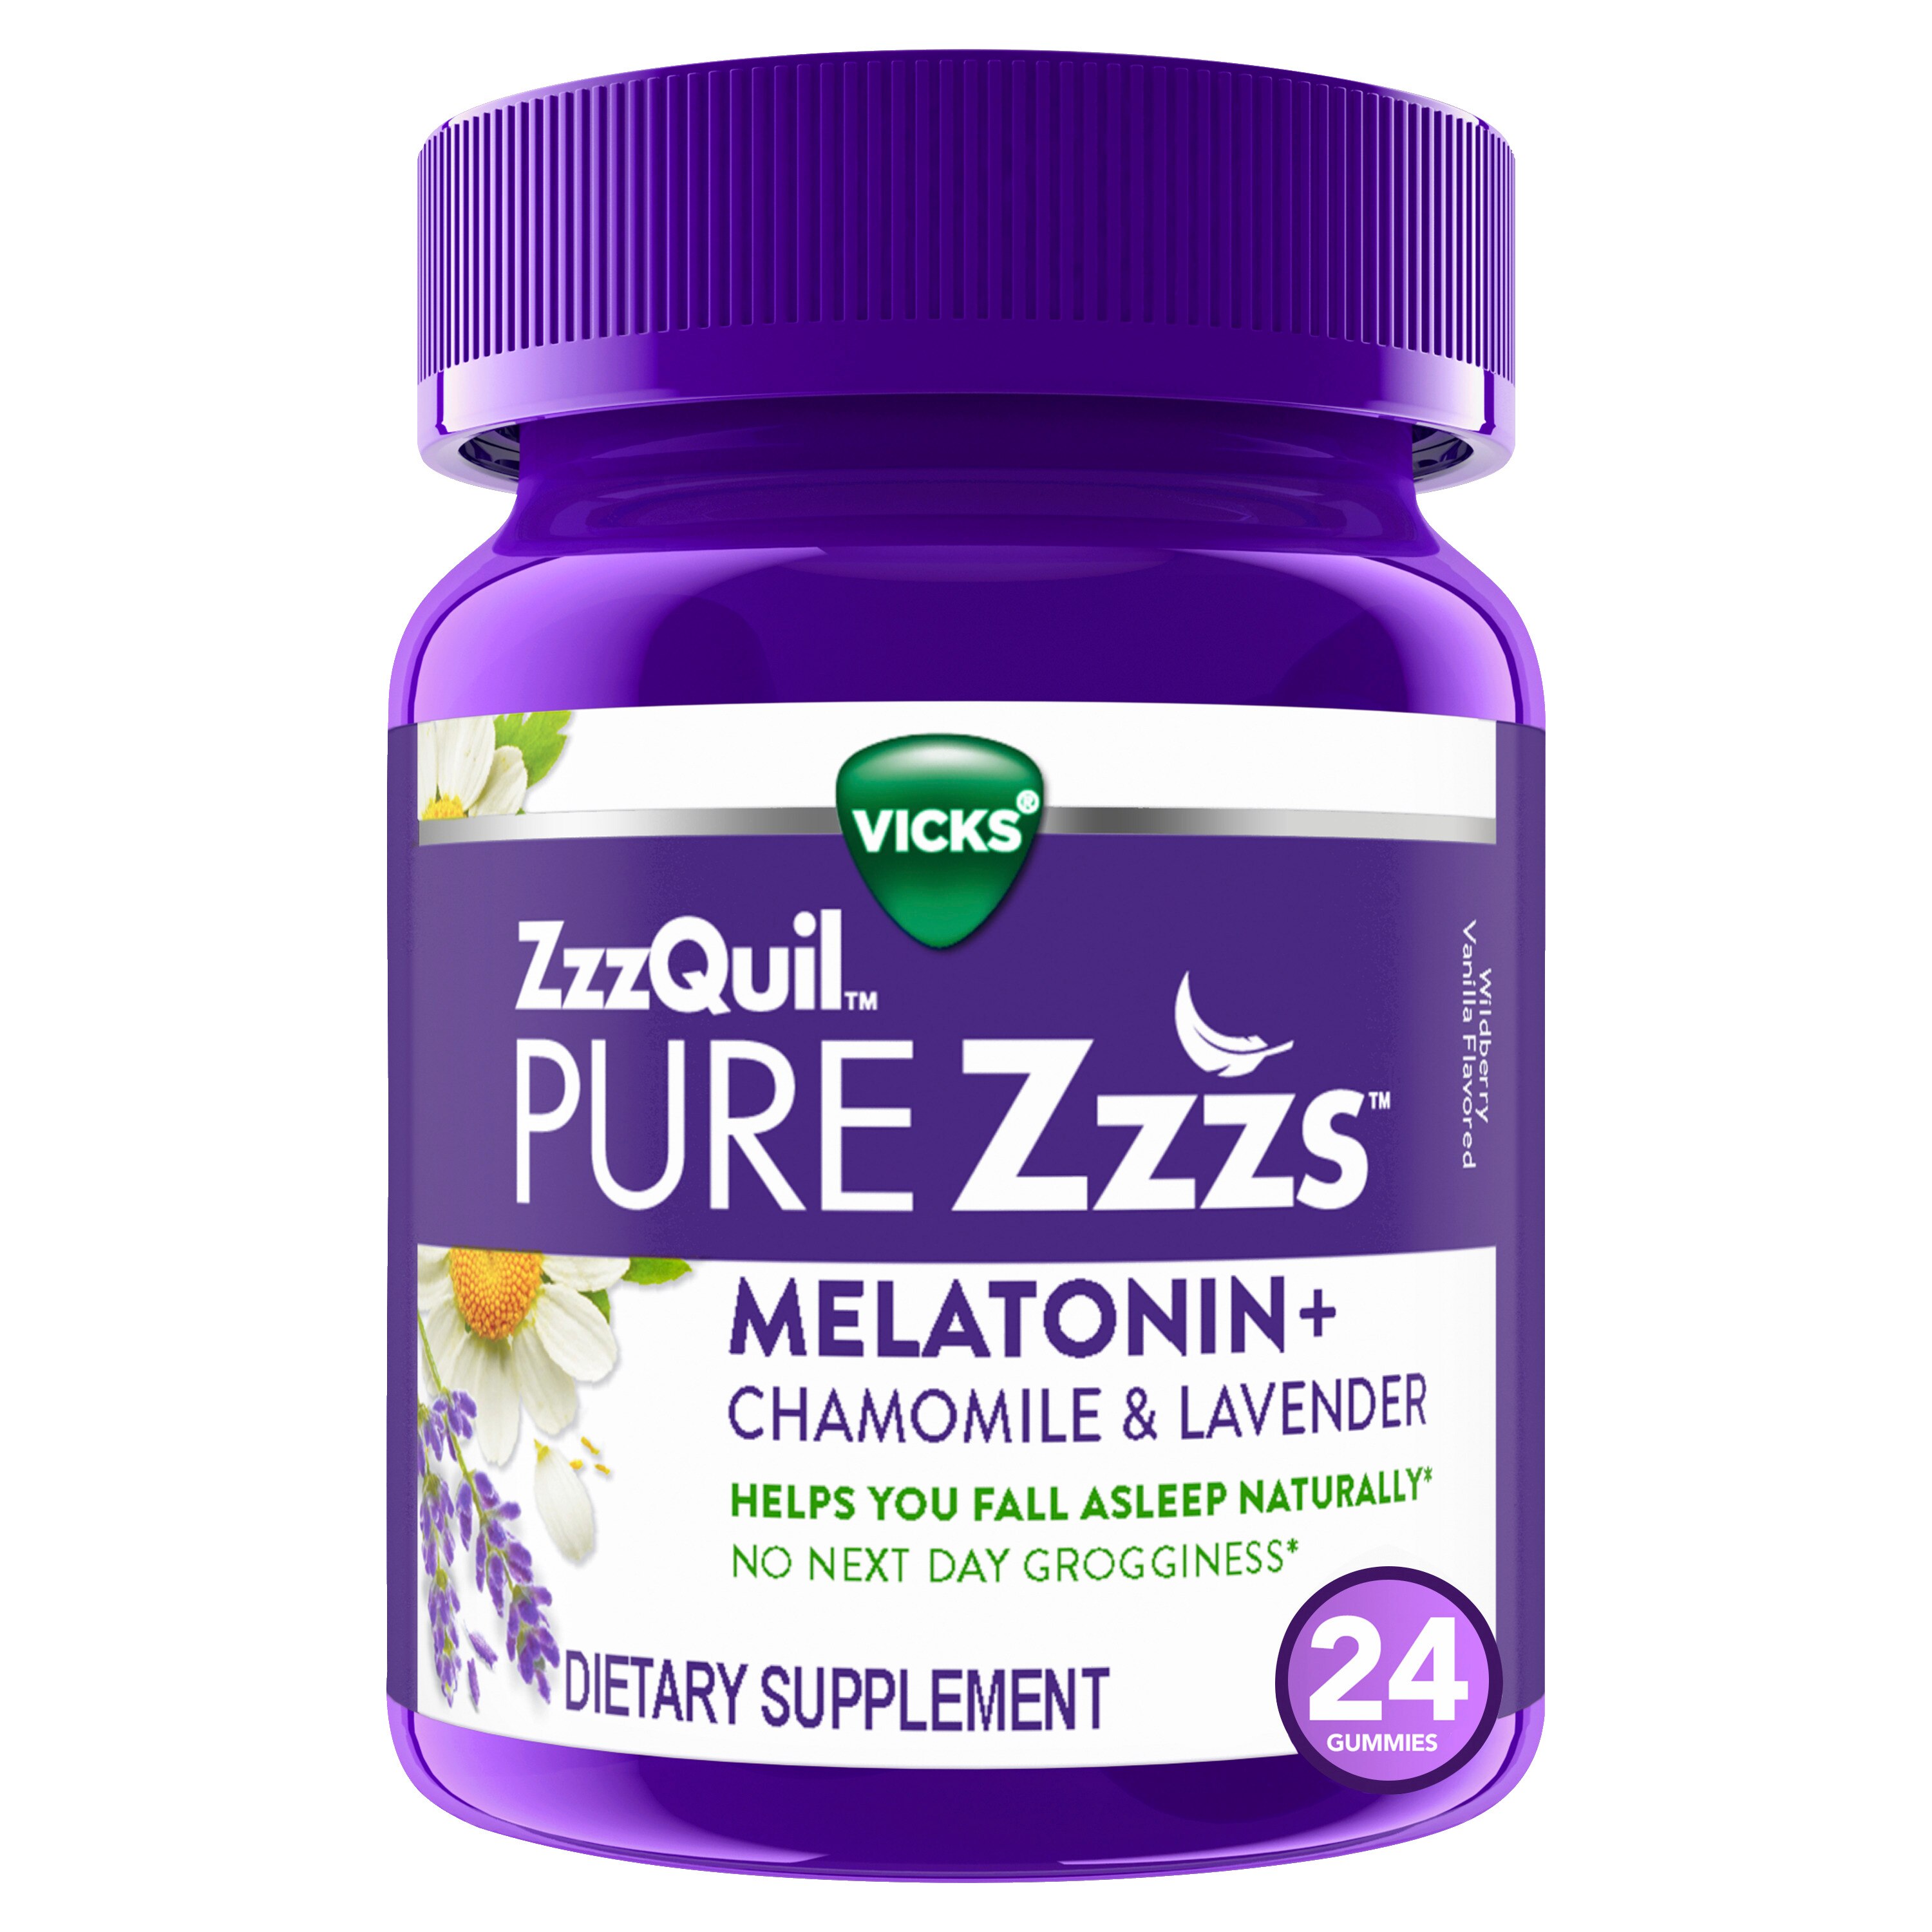 Vicks ZzzQuil PURE Zzzs Melatonin Natural Flavor Sleep Aid Gummies with Chamomile, Lavender, & Valerian Root, 1mg per gummy